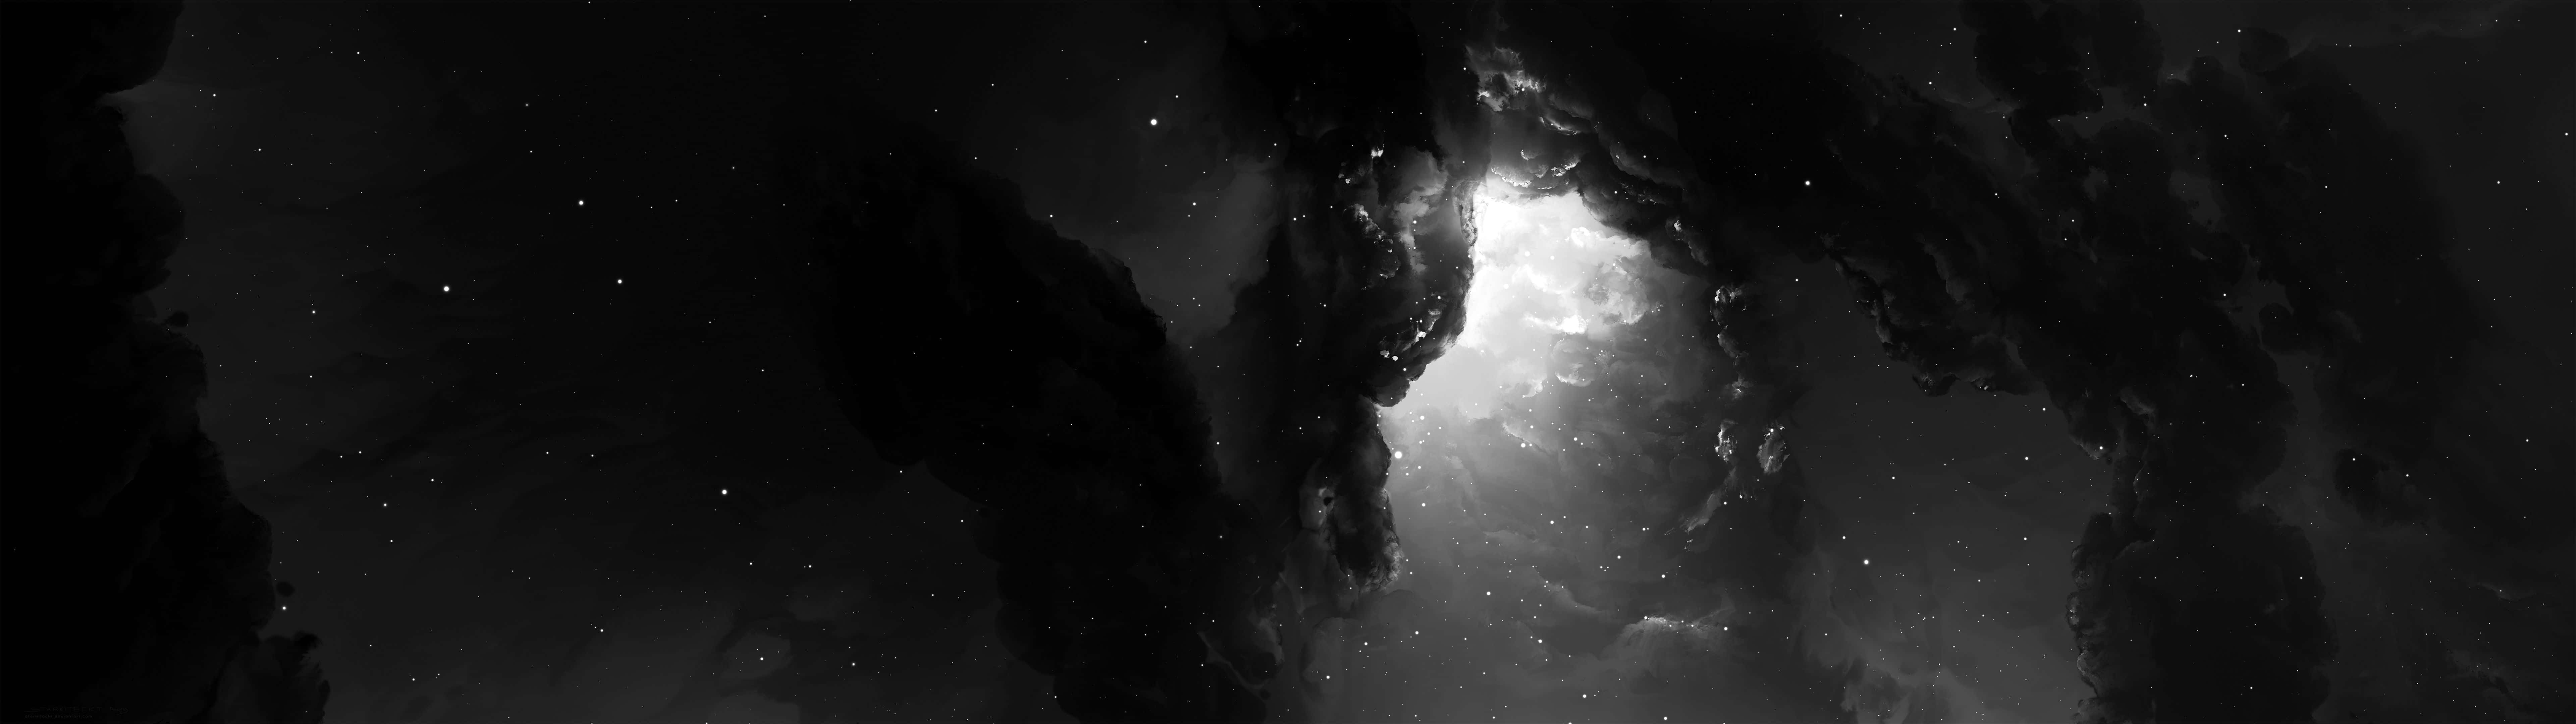 A Black And White Image Of A Cave With Stars Wallpaper